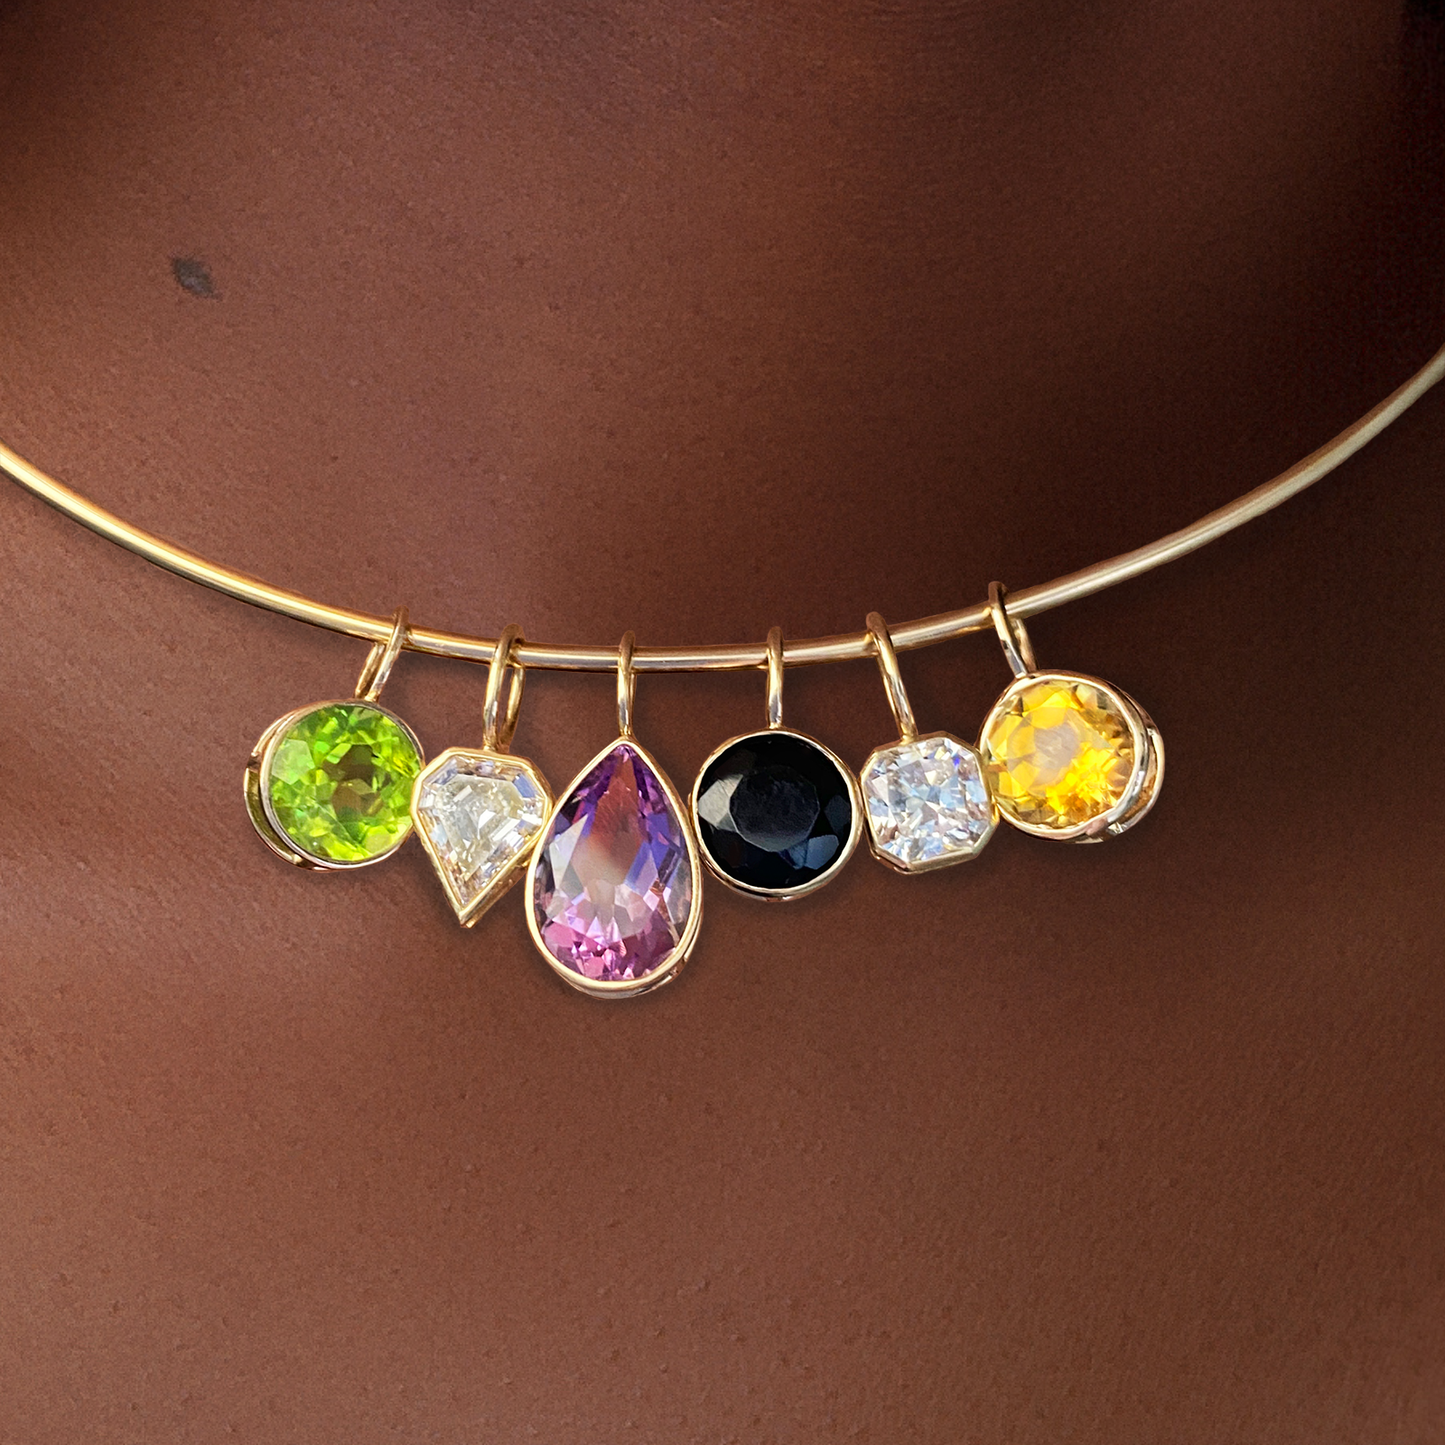 Various 14k gold shaped solitaire charms styled on a neck with the wire choker necklace